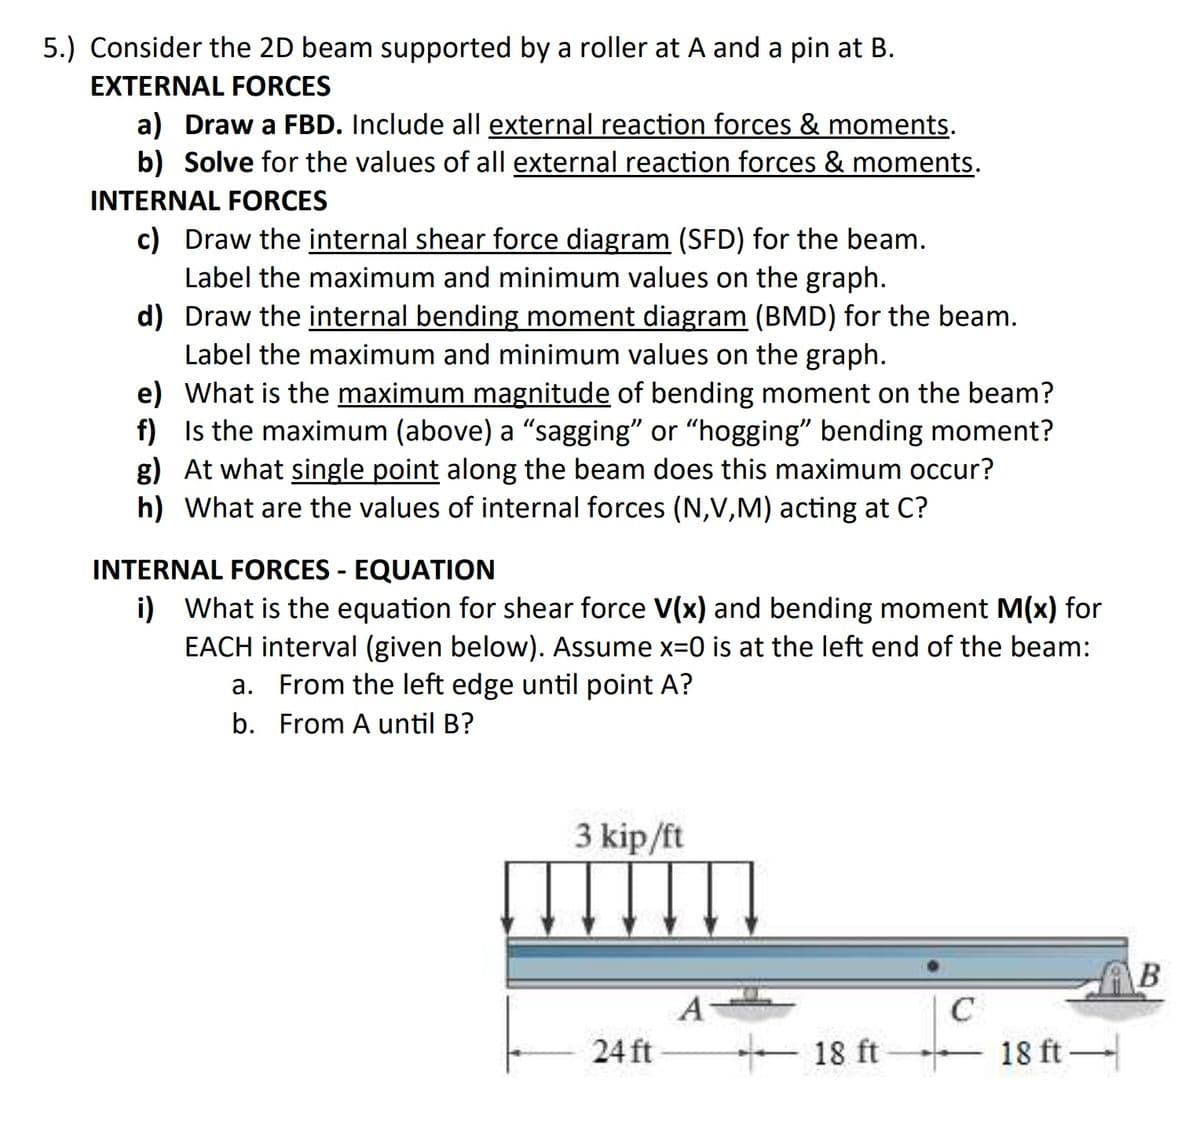 5.) Consider the 2D beam supported by a roller at A and a pin at B.
EXTERNAL FORCES
a) Draw a FBD. Include all external reaction forces & moments.
b) Solve for the values of all external reaction forces & moments.
INTERNAL FORCES
c) Draw the internal shear force diagram (SFD) for the beam.
Label the maximum and minimum values on the graph.
d) Draw the internal bending moment diagram (BMD) for the beam.
Label the maximum and minimum values on the graph.
e) What is the maximum magnitude of bending moment on the beam?
f) Is the maximum (above) a “sagging" or "hogging" bending moment?
g) At what single point along the beam does this maximum occur?
h) What are the values of internal forces (N,V,M) acting at C?
INTERNAL FORCES - EQUATION
i) What is the equation for shear force V(x) and bending moment M(x) for
EACH interval (given below). Assume x=0 is at the left end of the beam:
a. From the left edge until point A?
b. From A until B?
3 kip/ft
A
C
24 ft
- 18 ft
- 18 ft –
